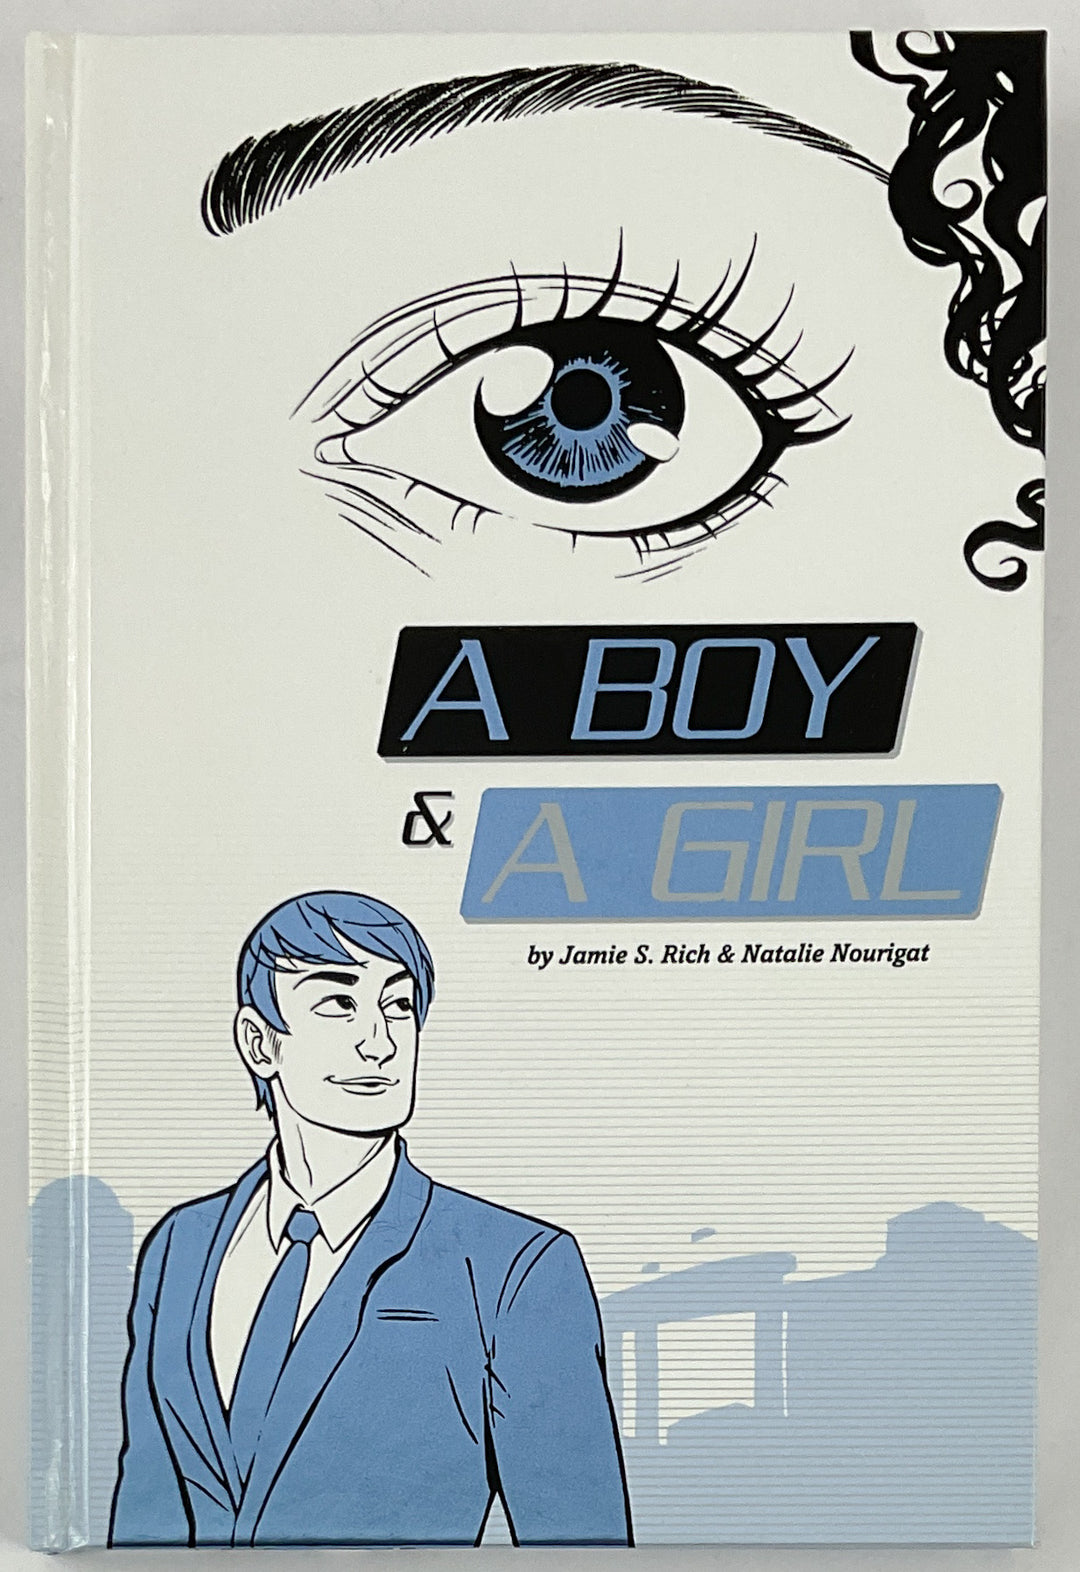 A Boy & A Girl - Hardcover First Signed by the Artist